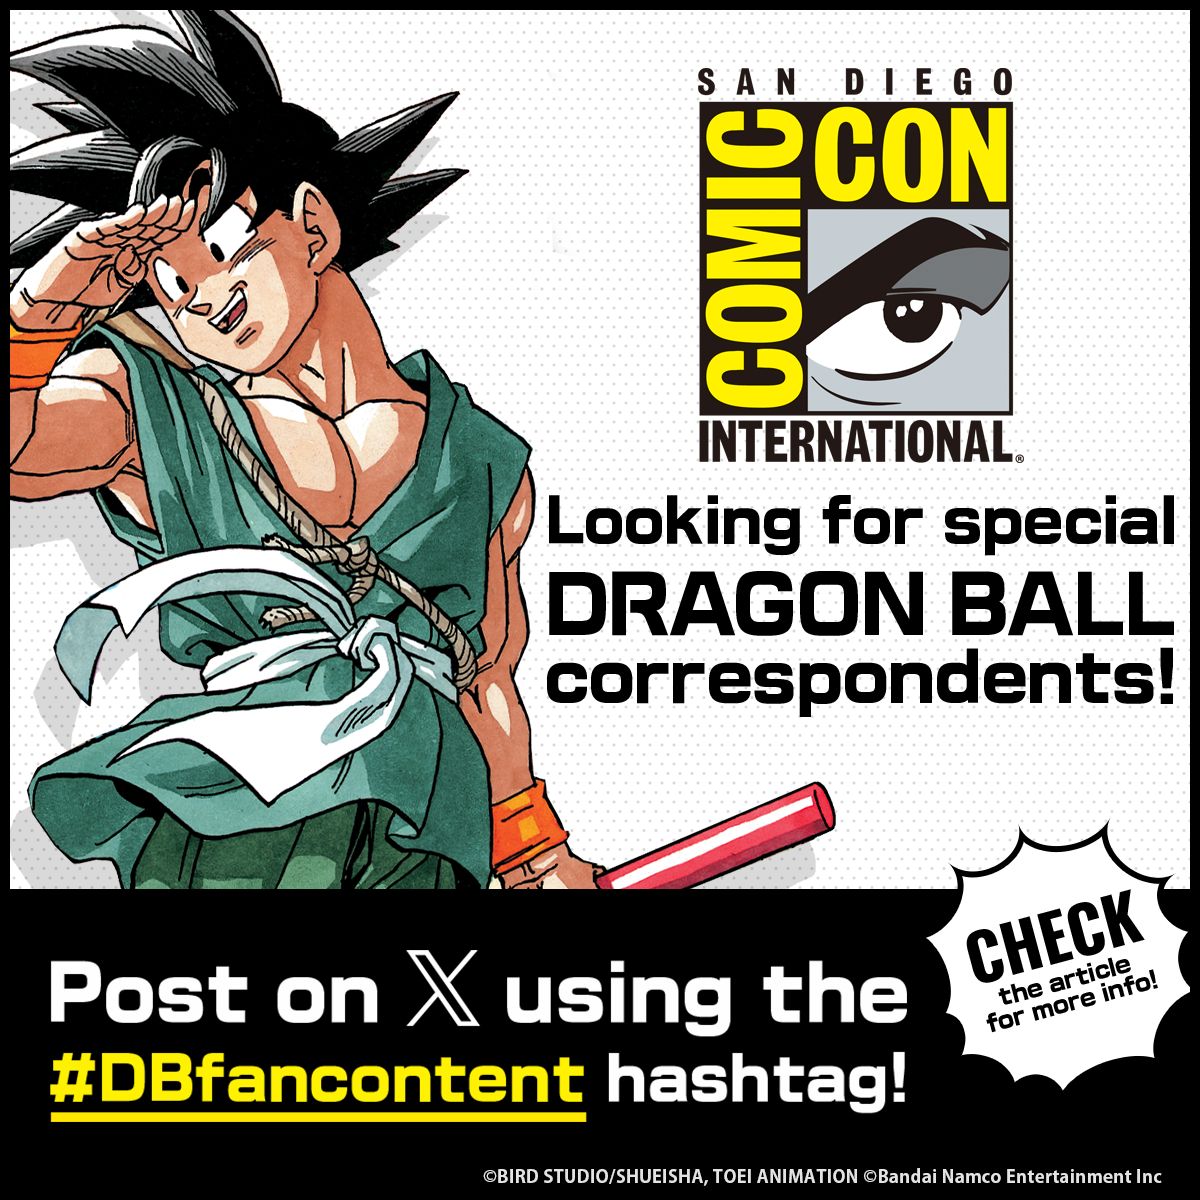 Looking for Special Correspondents for Comic-Con International: San Diego! Just Post on X Using the Hashtag #DBfancontent to Participate!